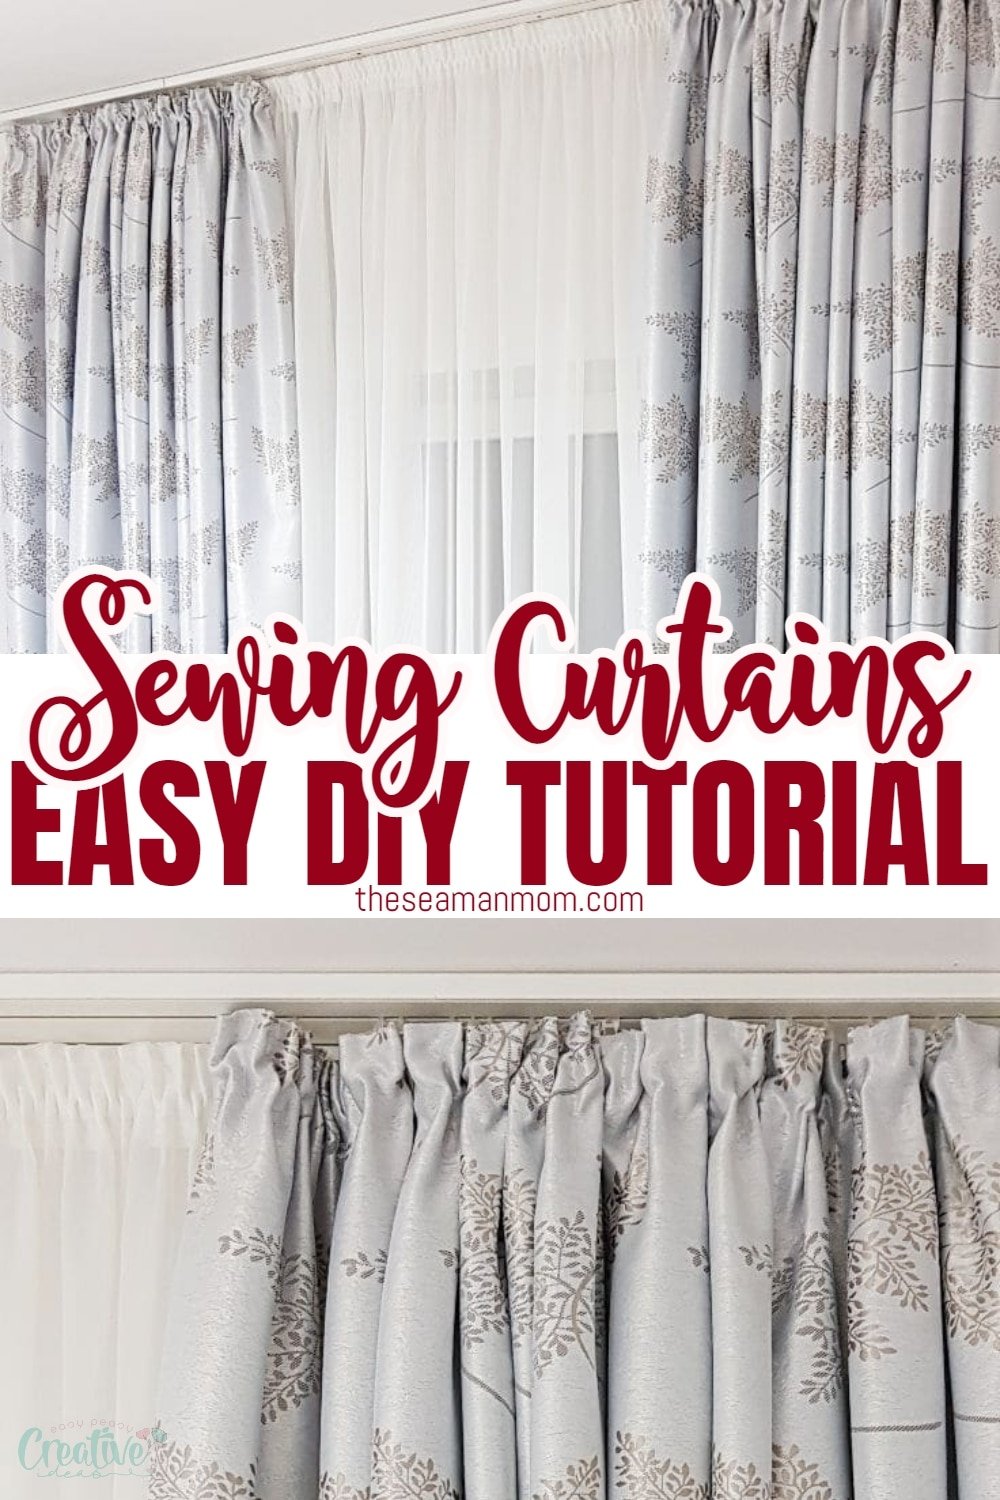 If you're looking for a simple sewing project that will really make a difference in your home decor, look no further than DIY curtains. With just a few supplies and some basic sewing skills, you can create beautiful curtains that will add privacy, style, and warmth to any room. So what are you waiting for? Get started today and let me know your own DIY curtain ideas, in the comments below. via @petroneagu